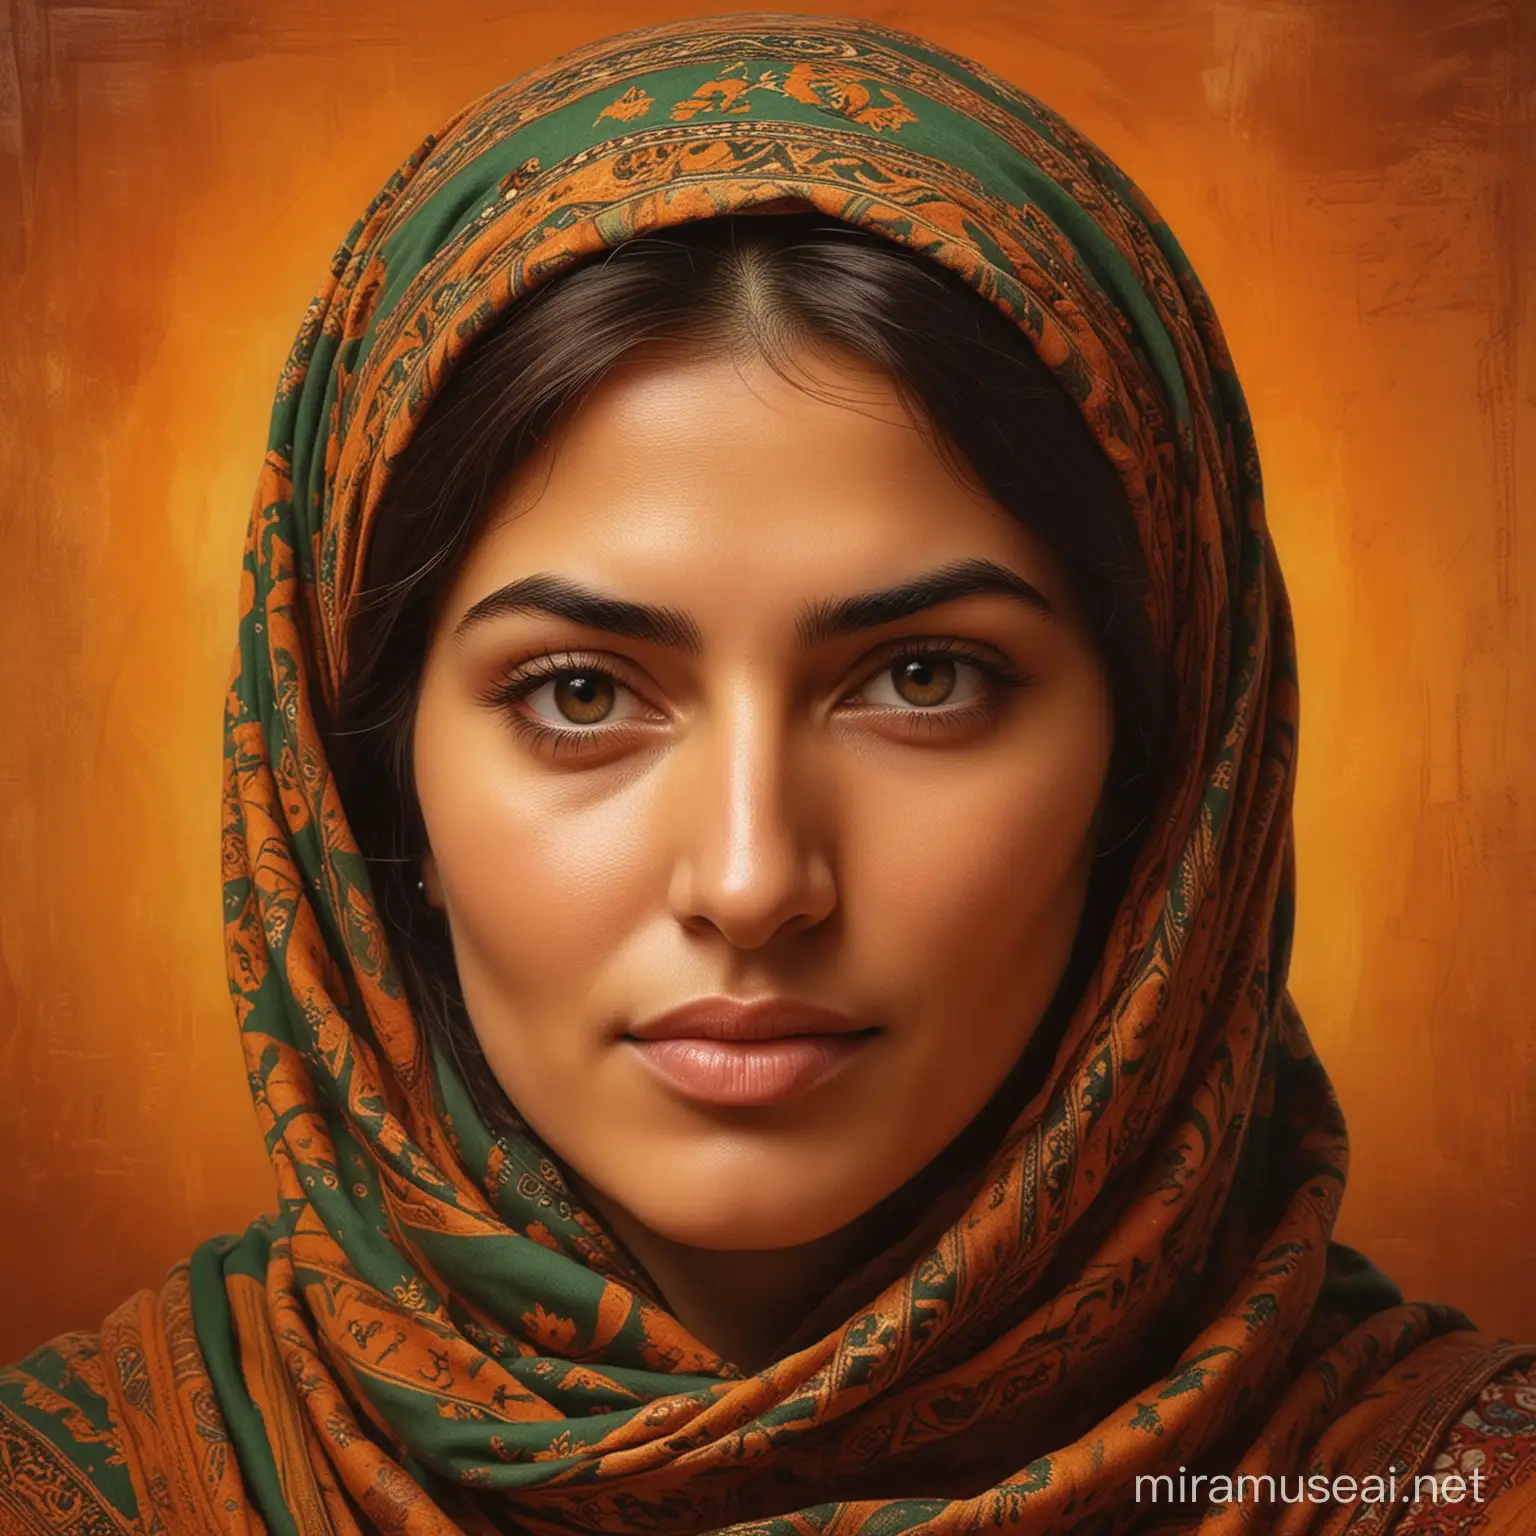 symbolic image of a Bakhtiari woman's face with a warm background color 